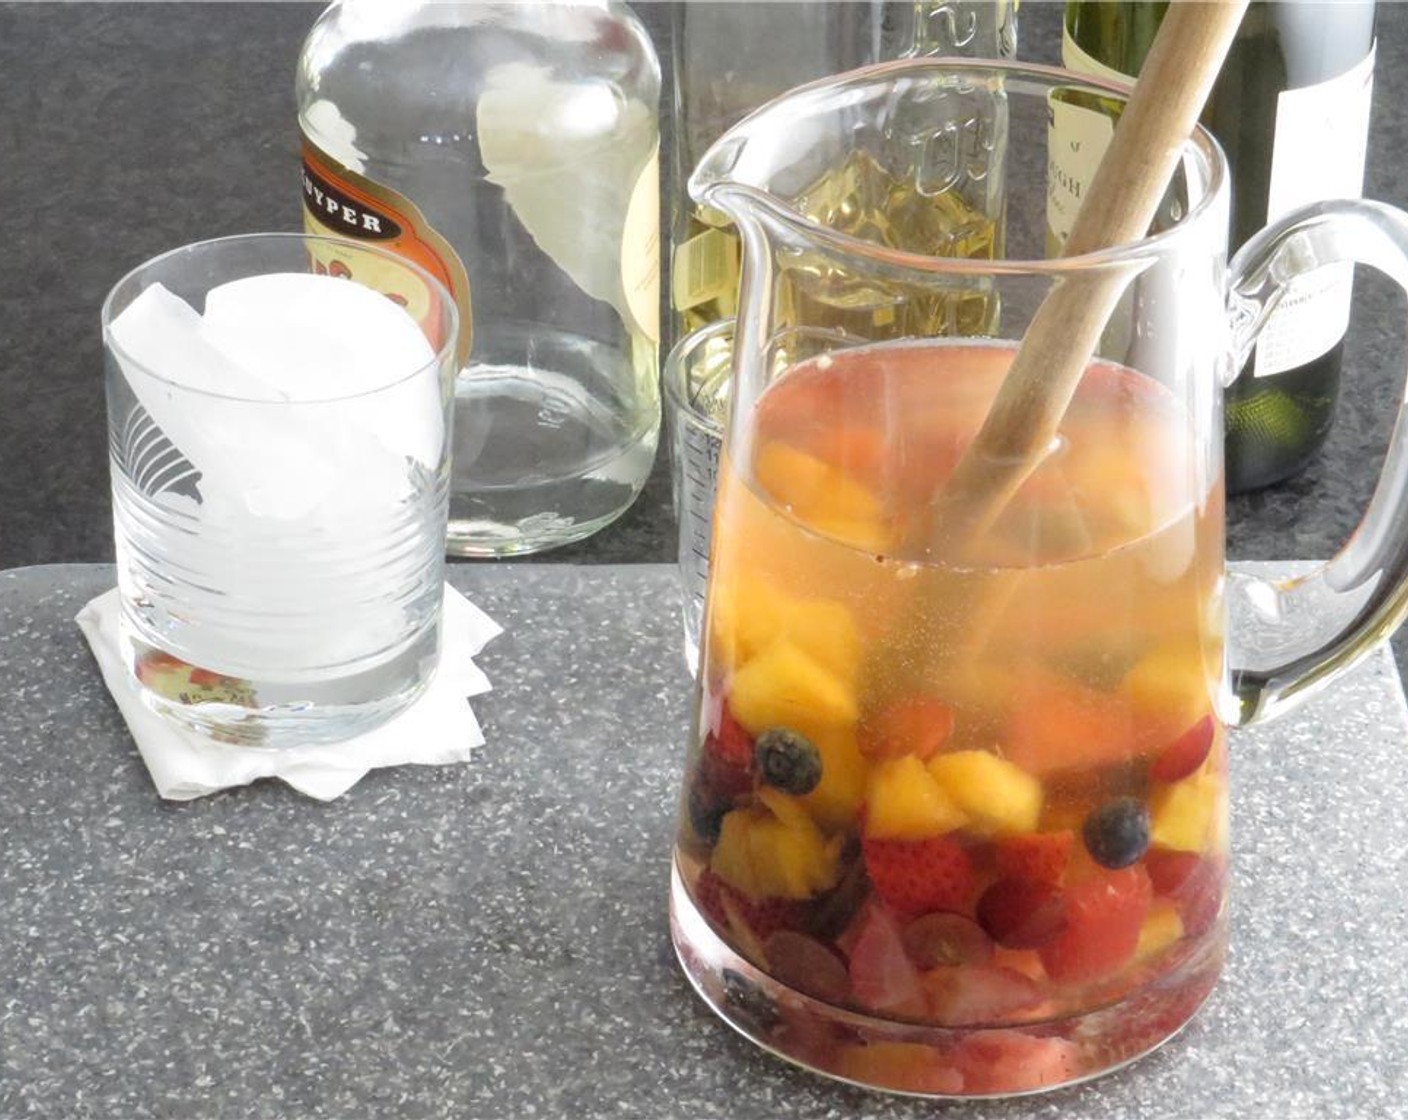 step 3 Combine the fruit mix with Triple Sec (1/2 cup), White Rum (1 cup) and Dry White Wine (3 cups) together in a pitcher. Chill for several hours. Serve as is, or with a splash of Soda Water (to taste) if desired.